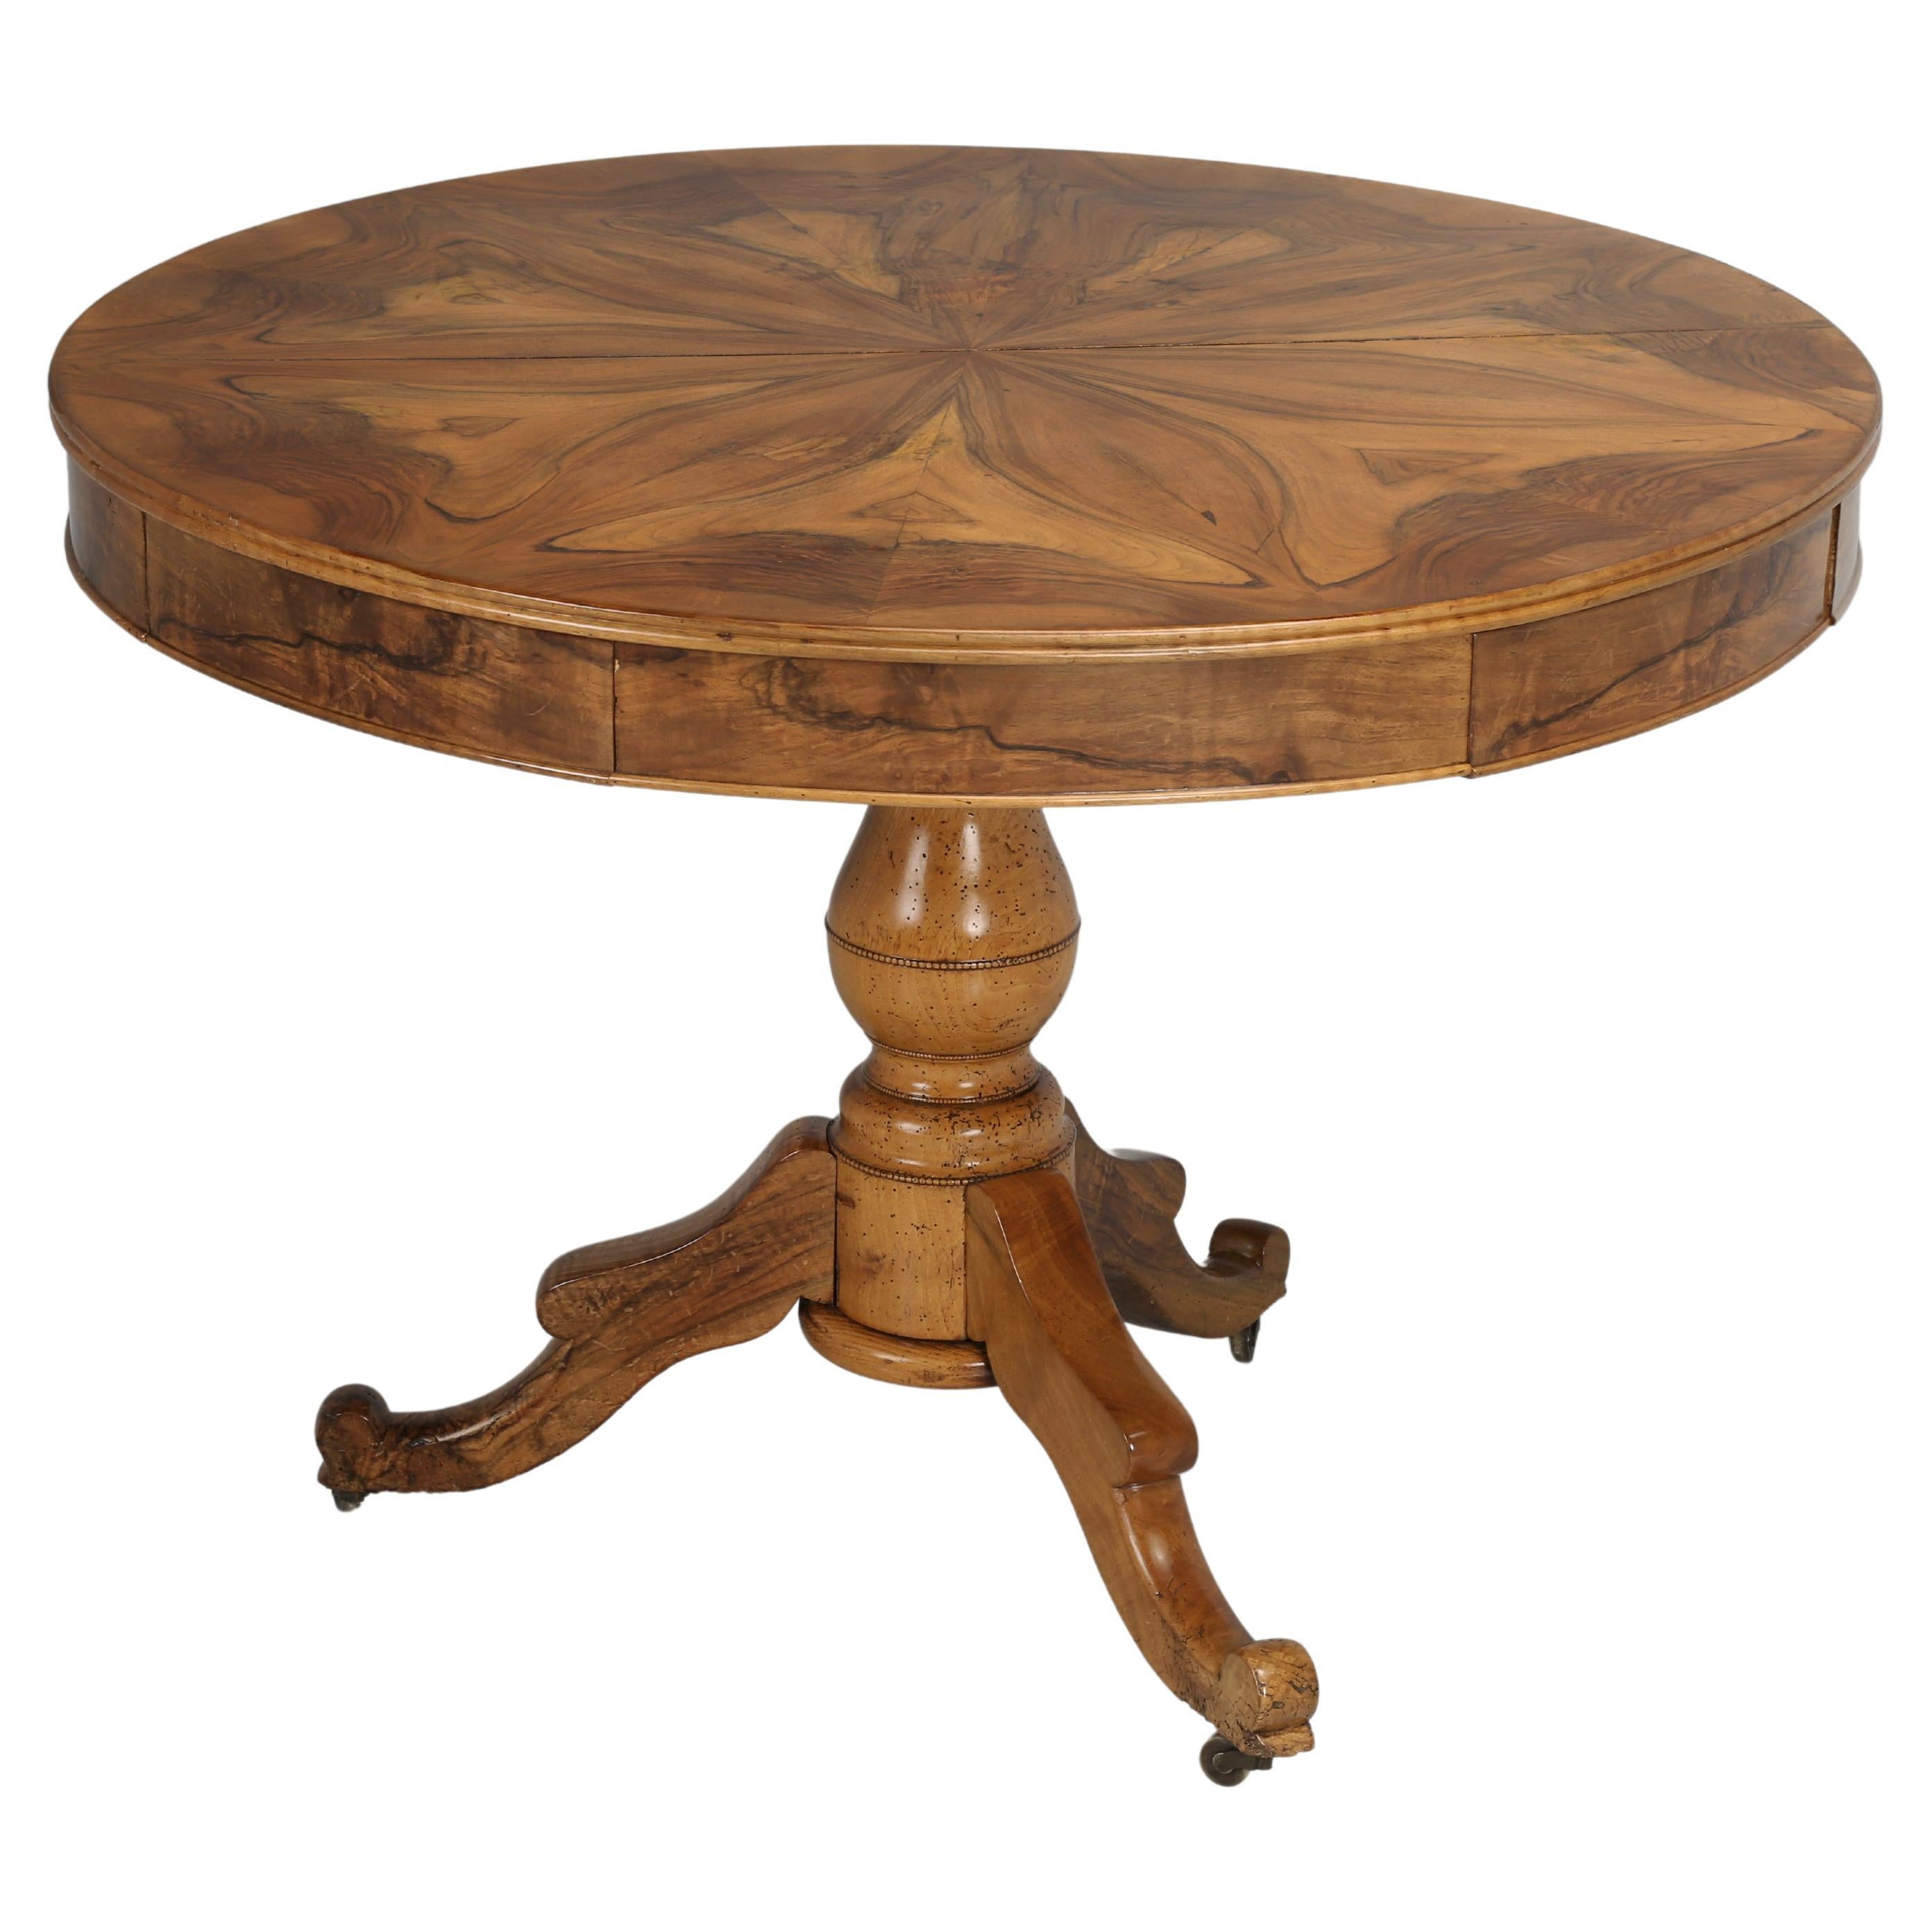 Antique French Center Hall Table in Crotch Walnut with French Polish Finish For Sale